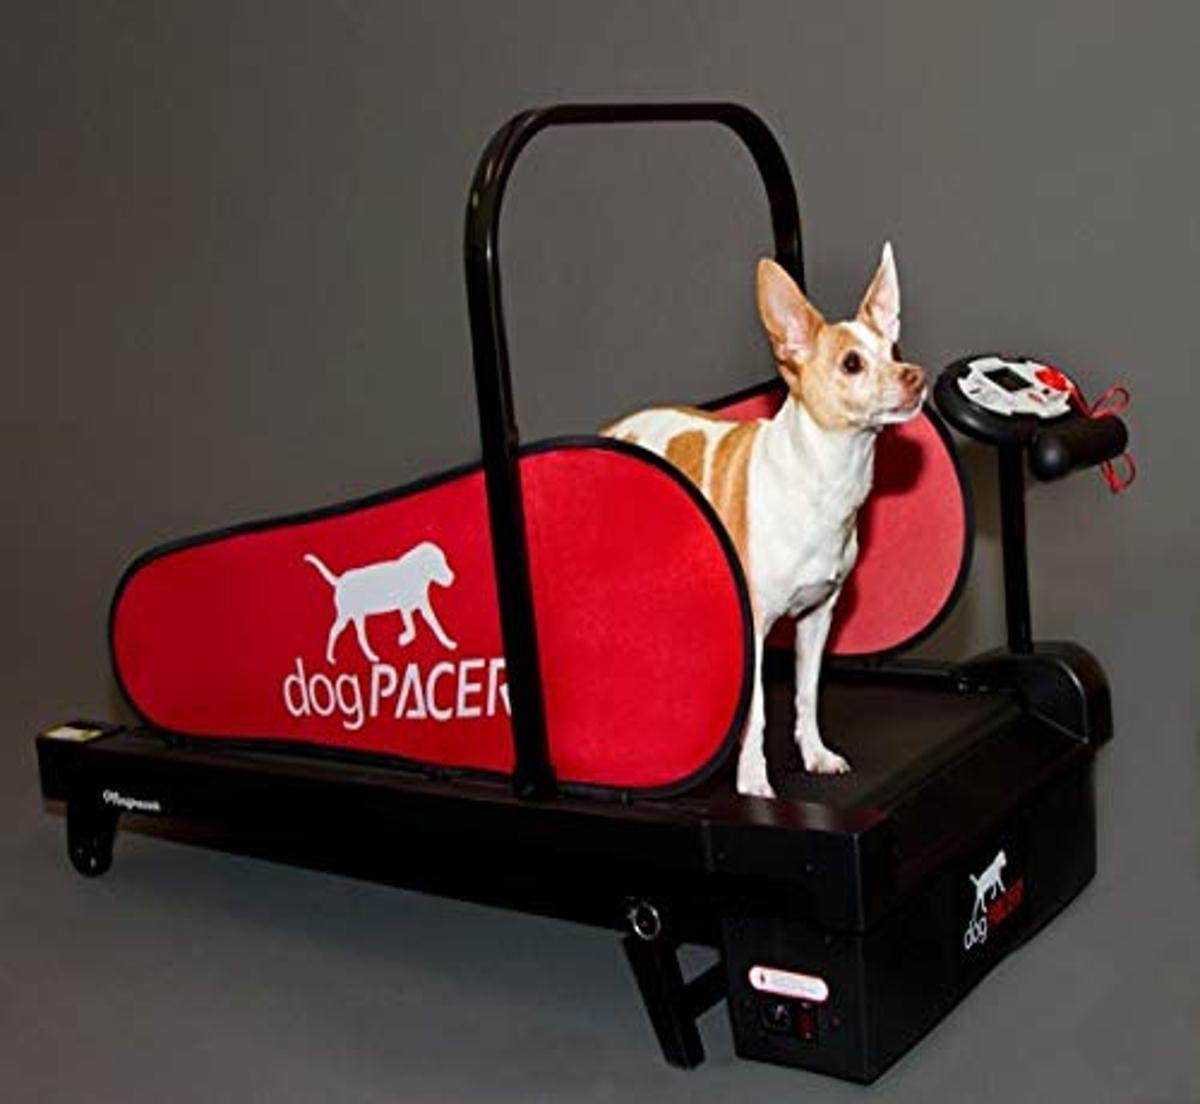 6. dogPACER MiniPACER Treadmill